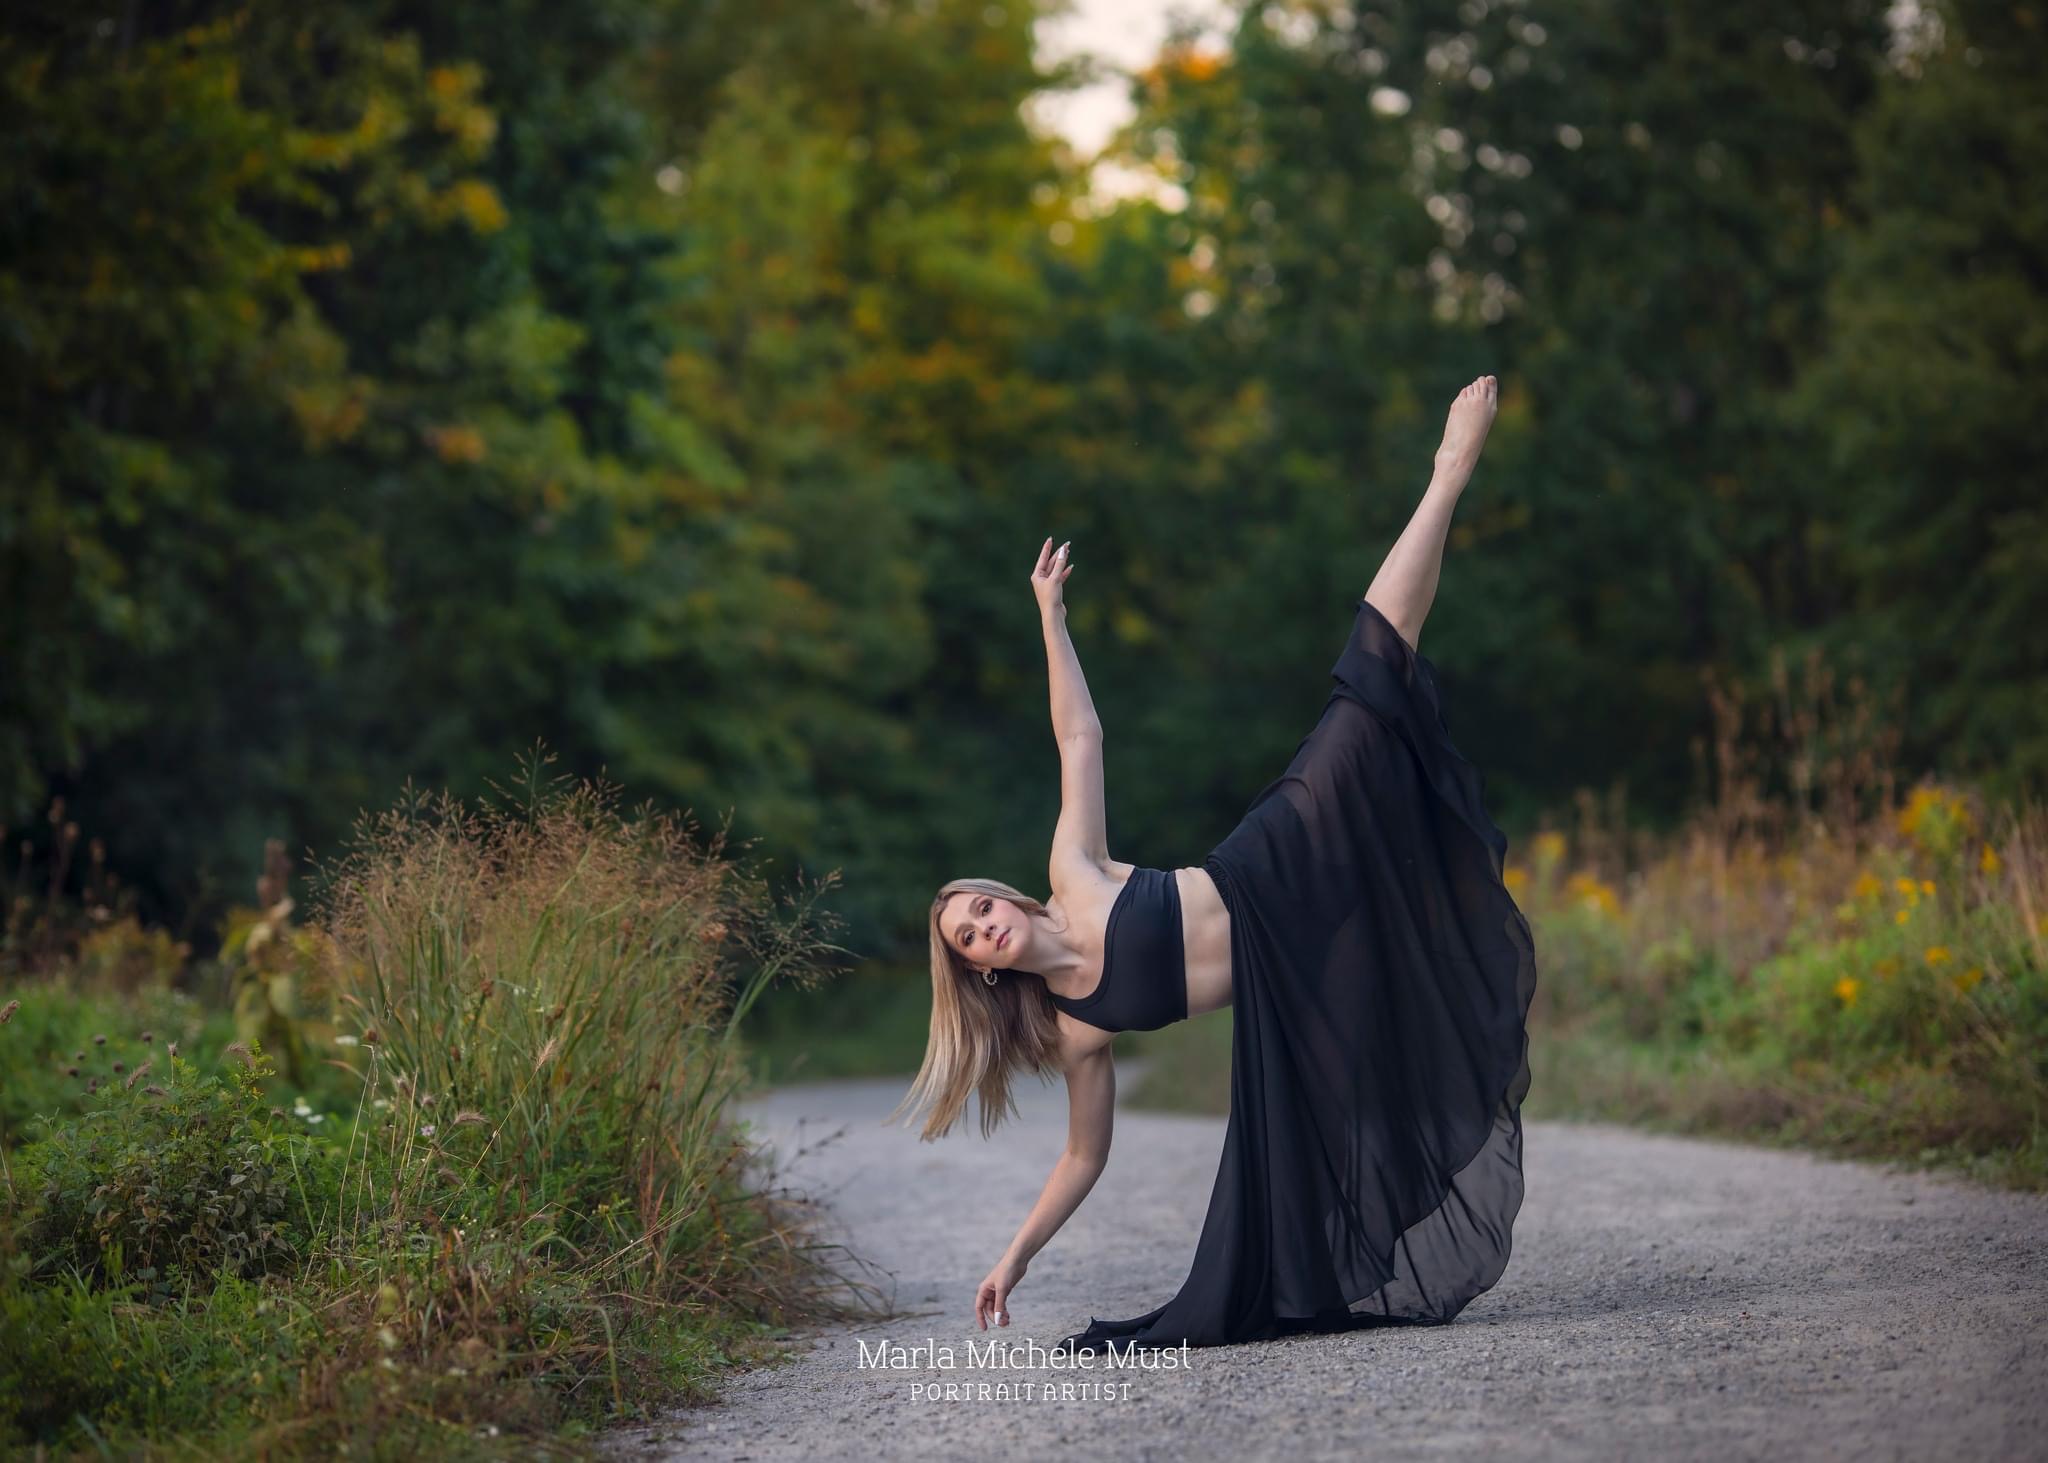 Dancer in a flowy black dress poses in a leaning pose on a Detroit park pathway for a dance photoshoot.